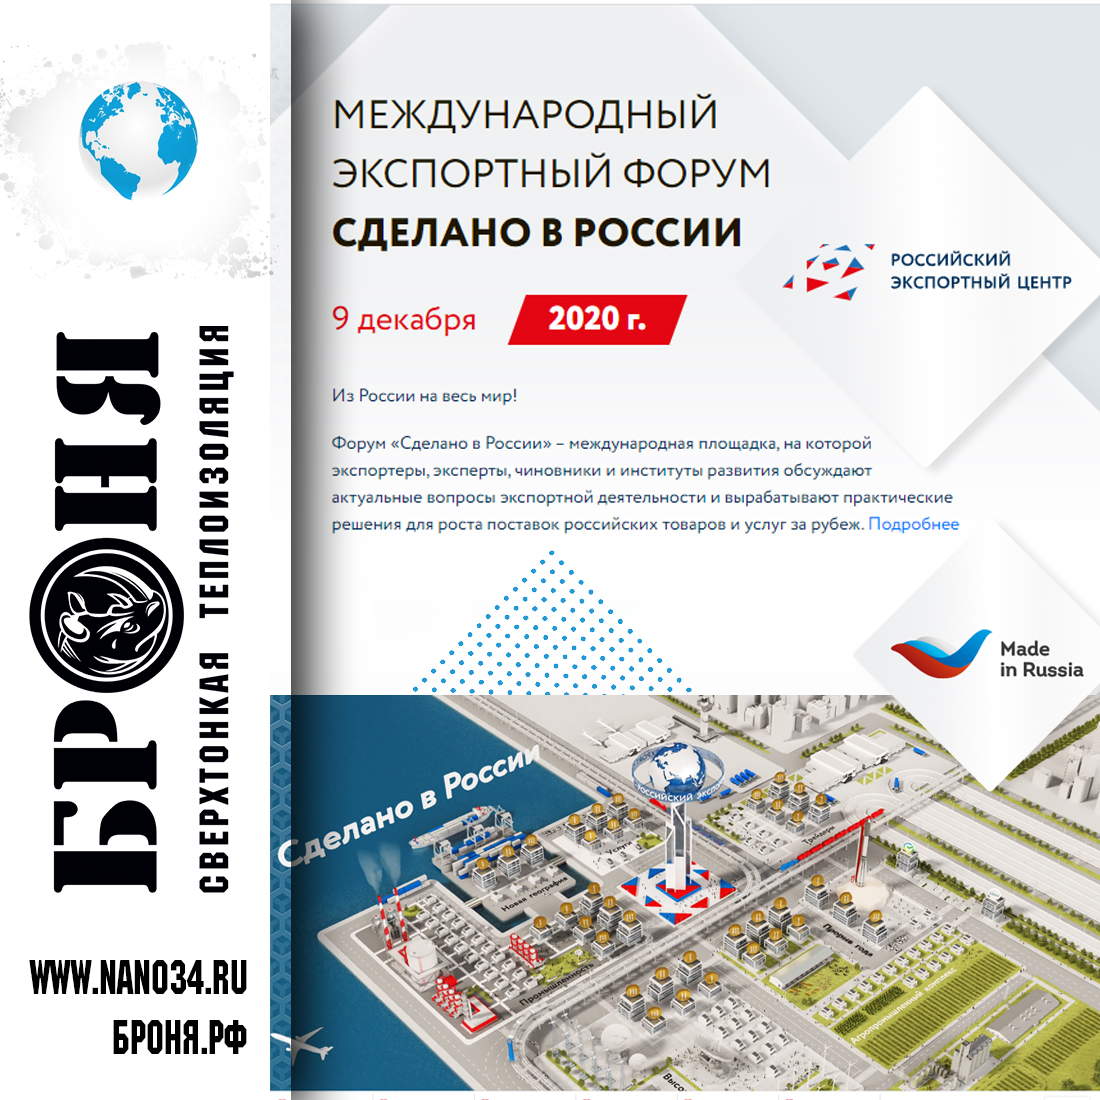 IMPORTANT! LLC NPO BRONYA took part in the International Export Forum "Made in Russia", which was held on December 9